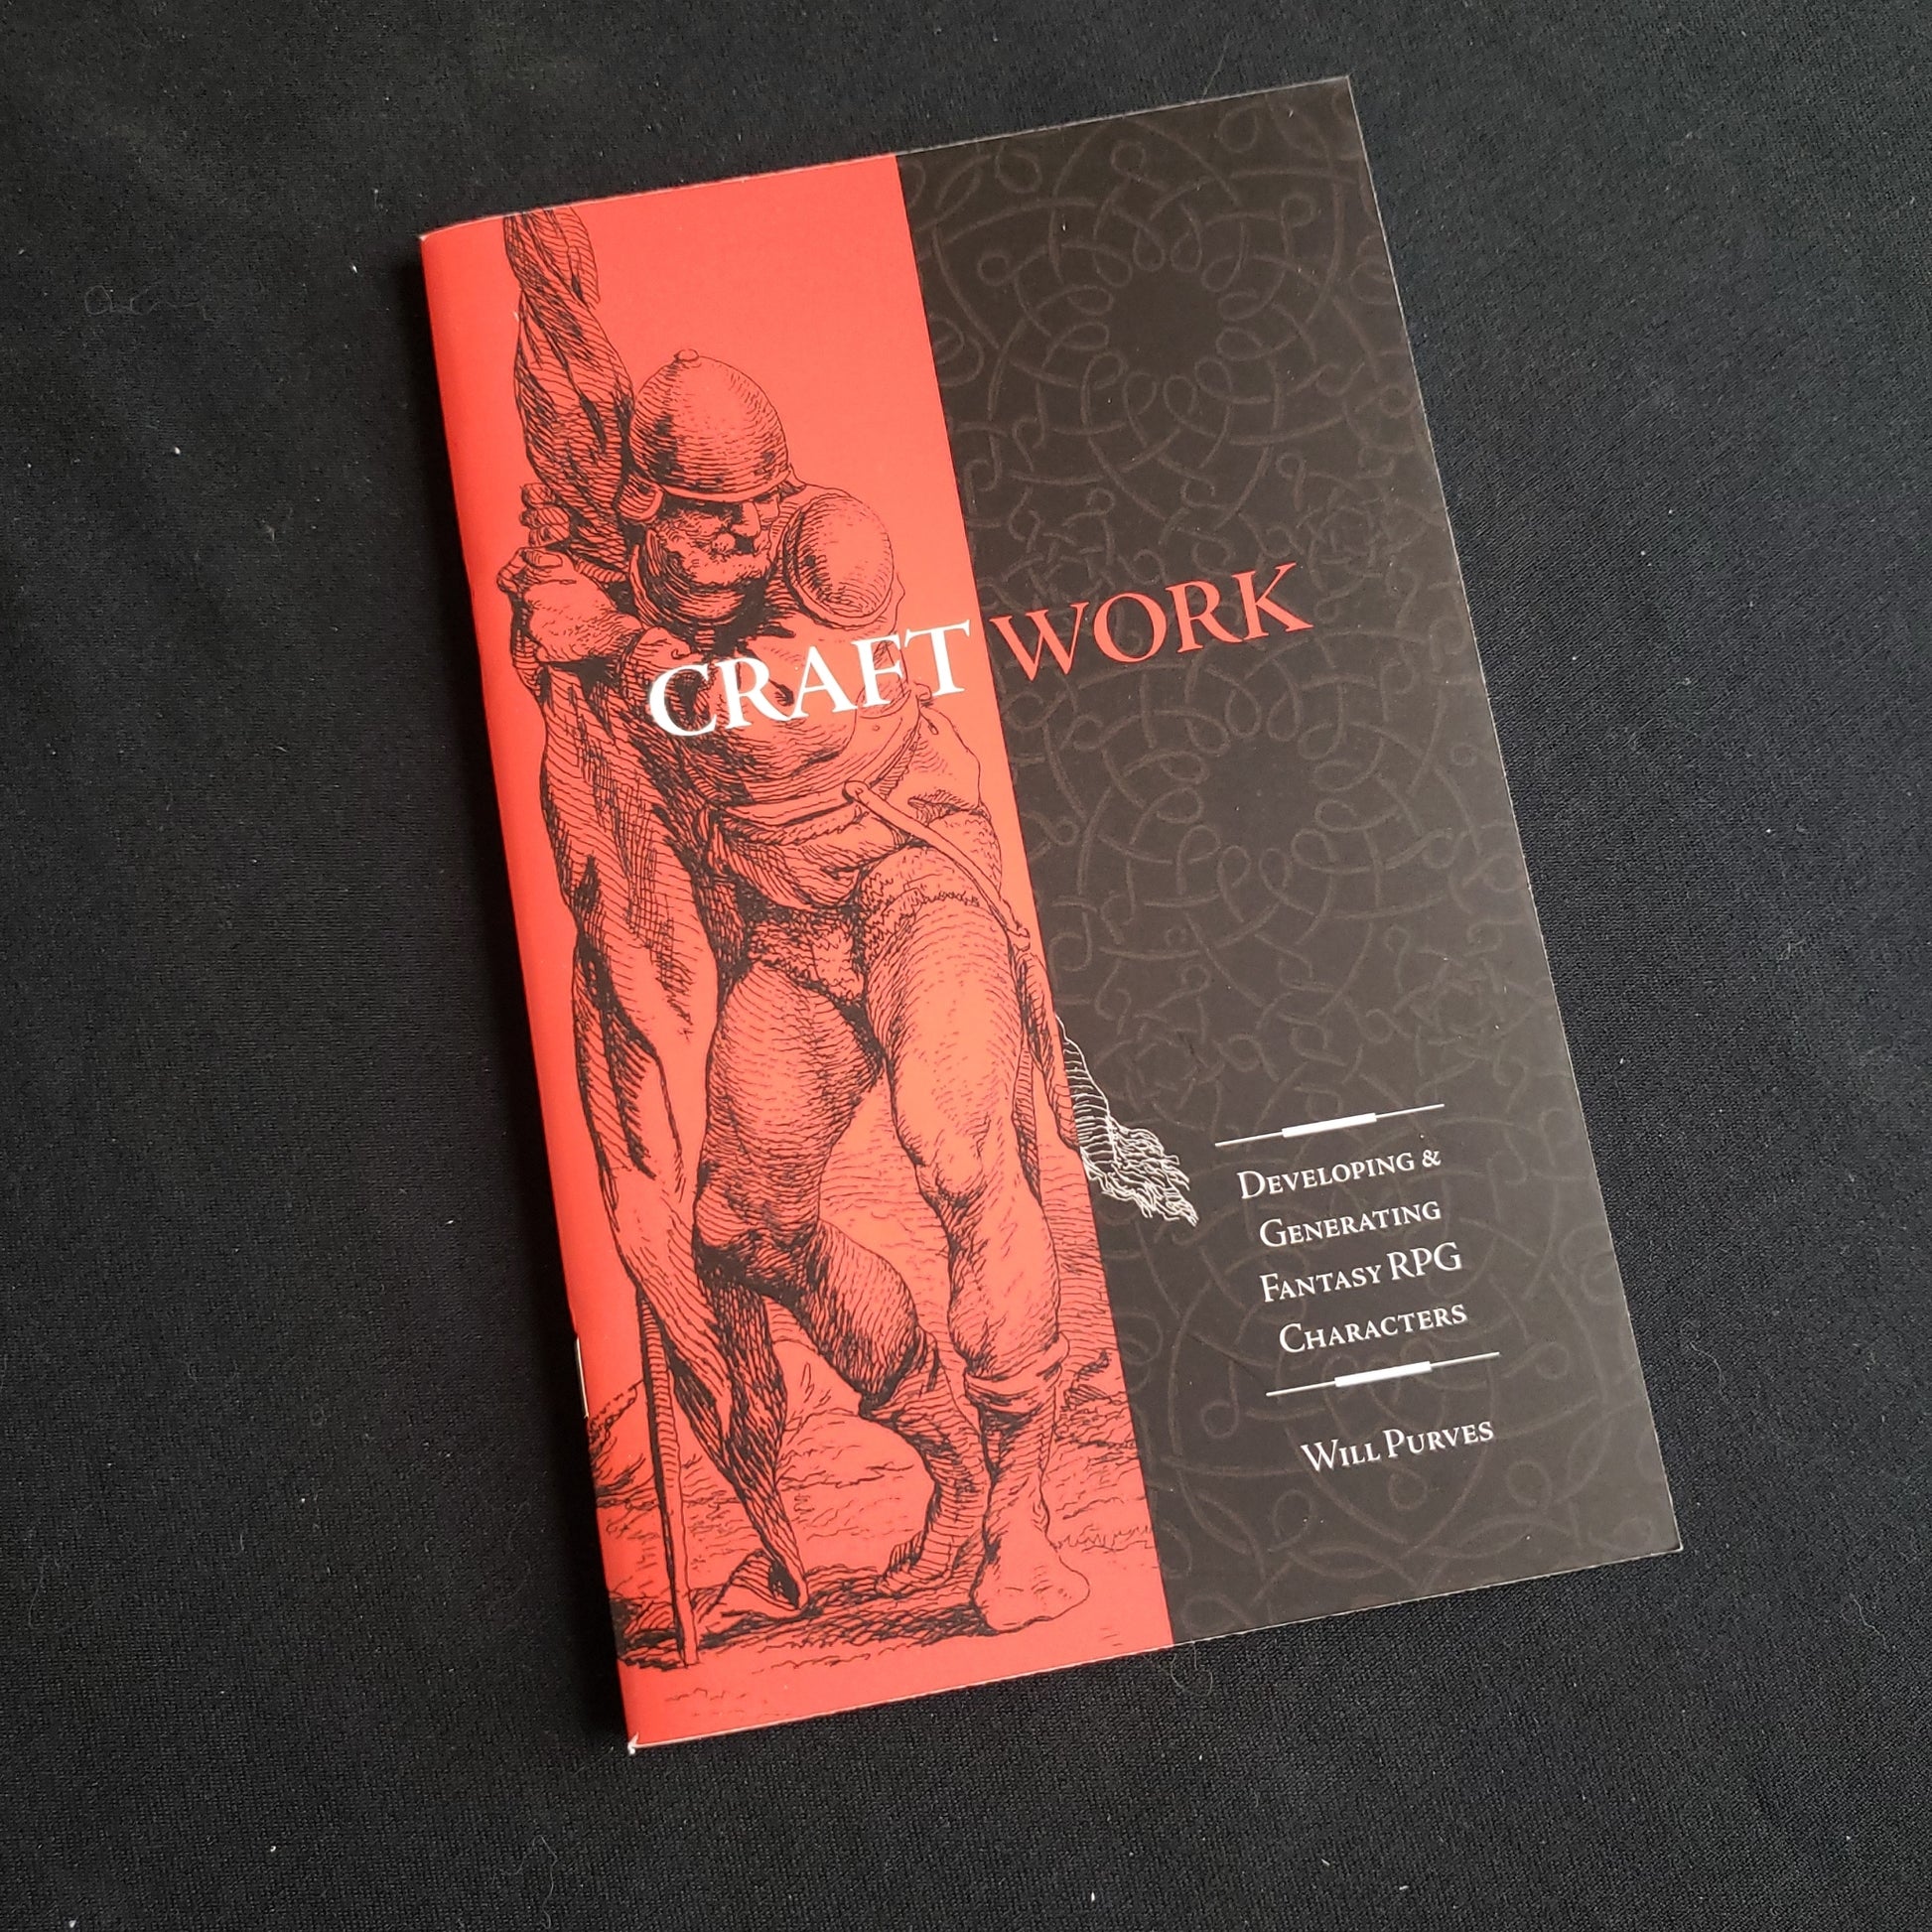 Image shows the front cover of the CraftWork roleplaying game book